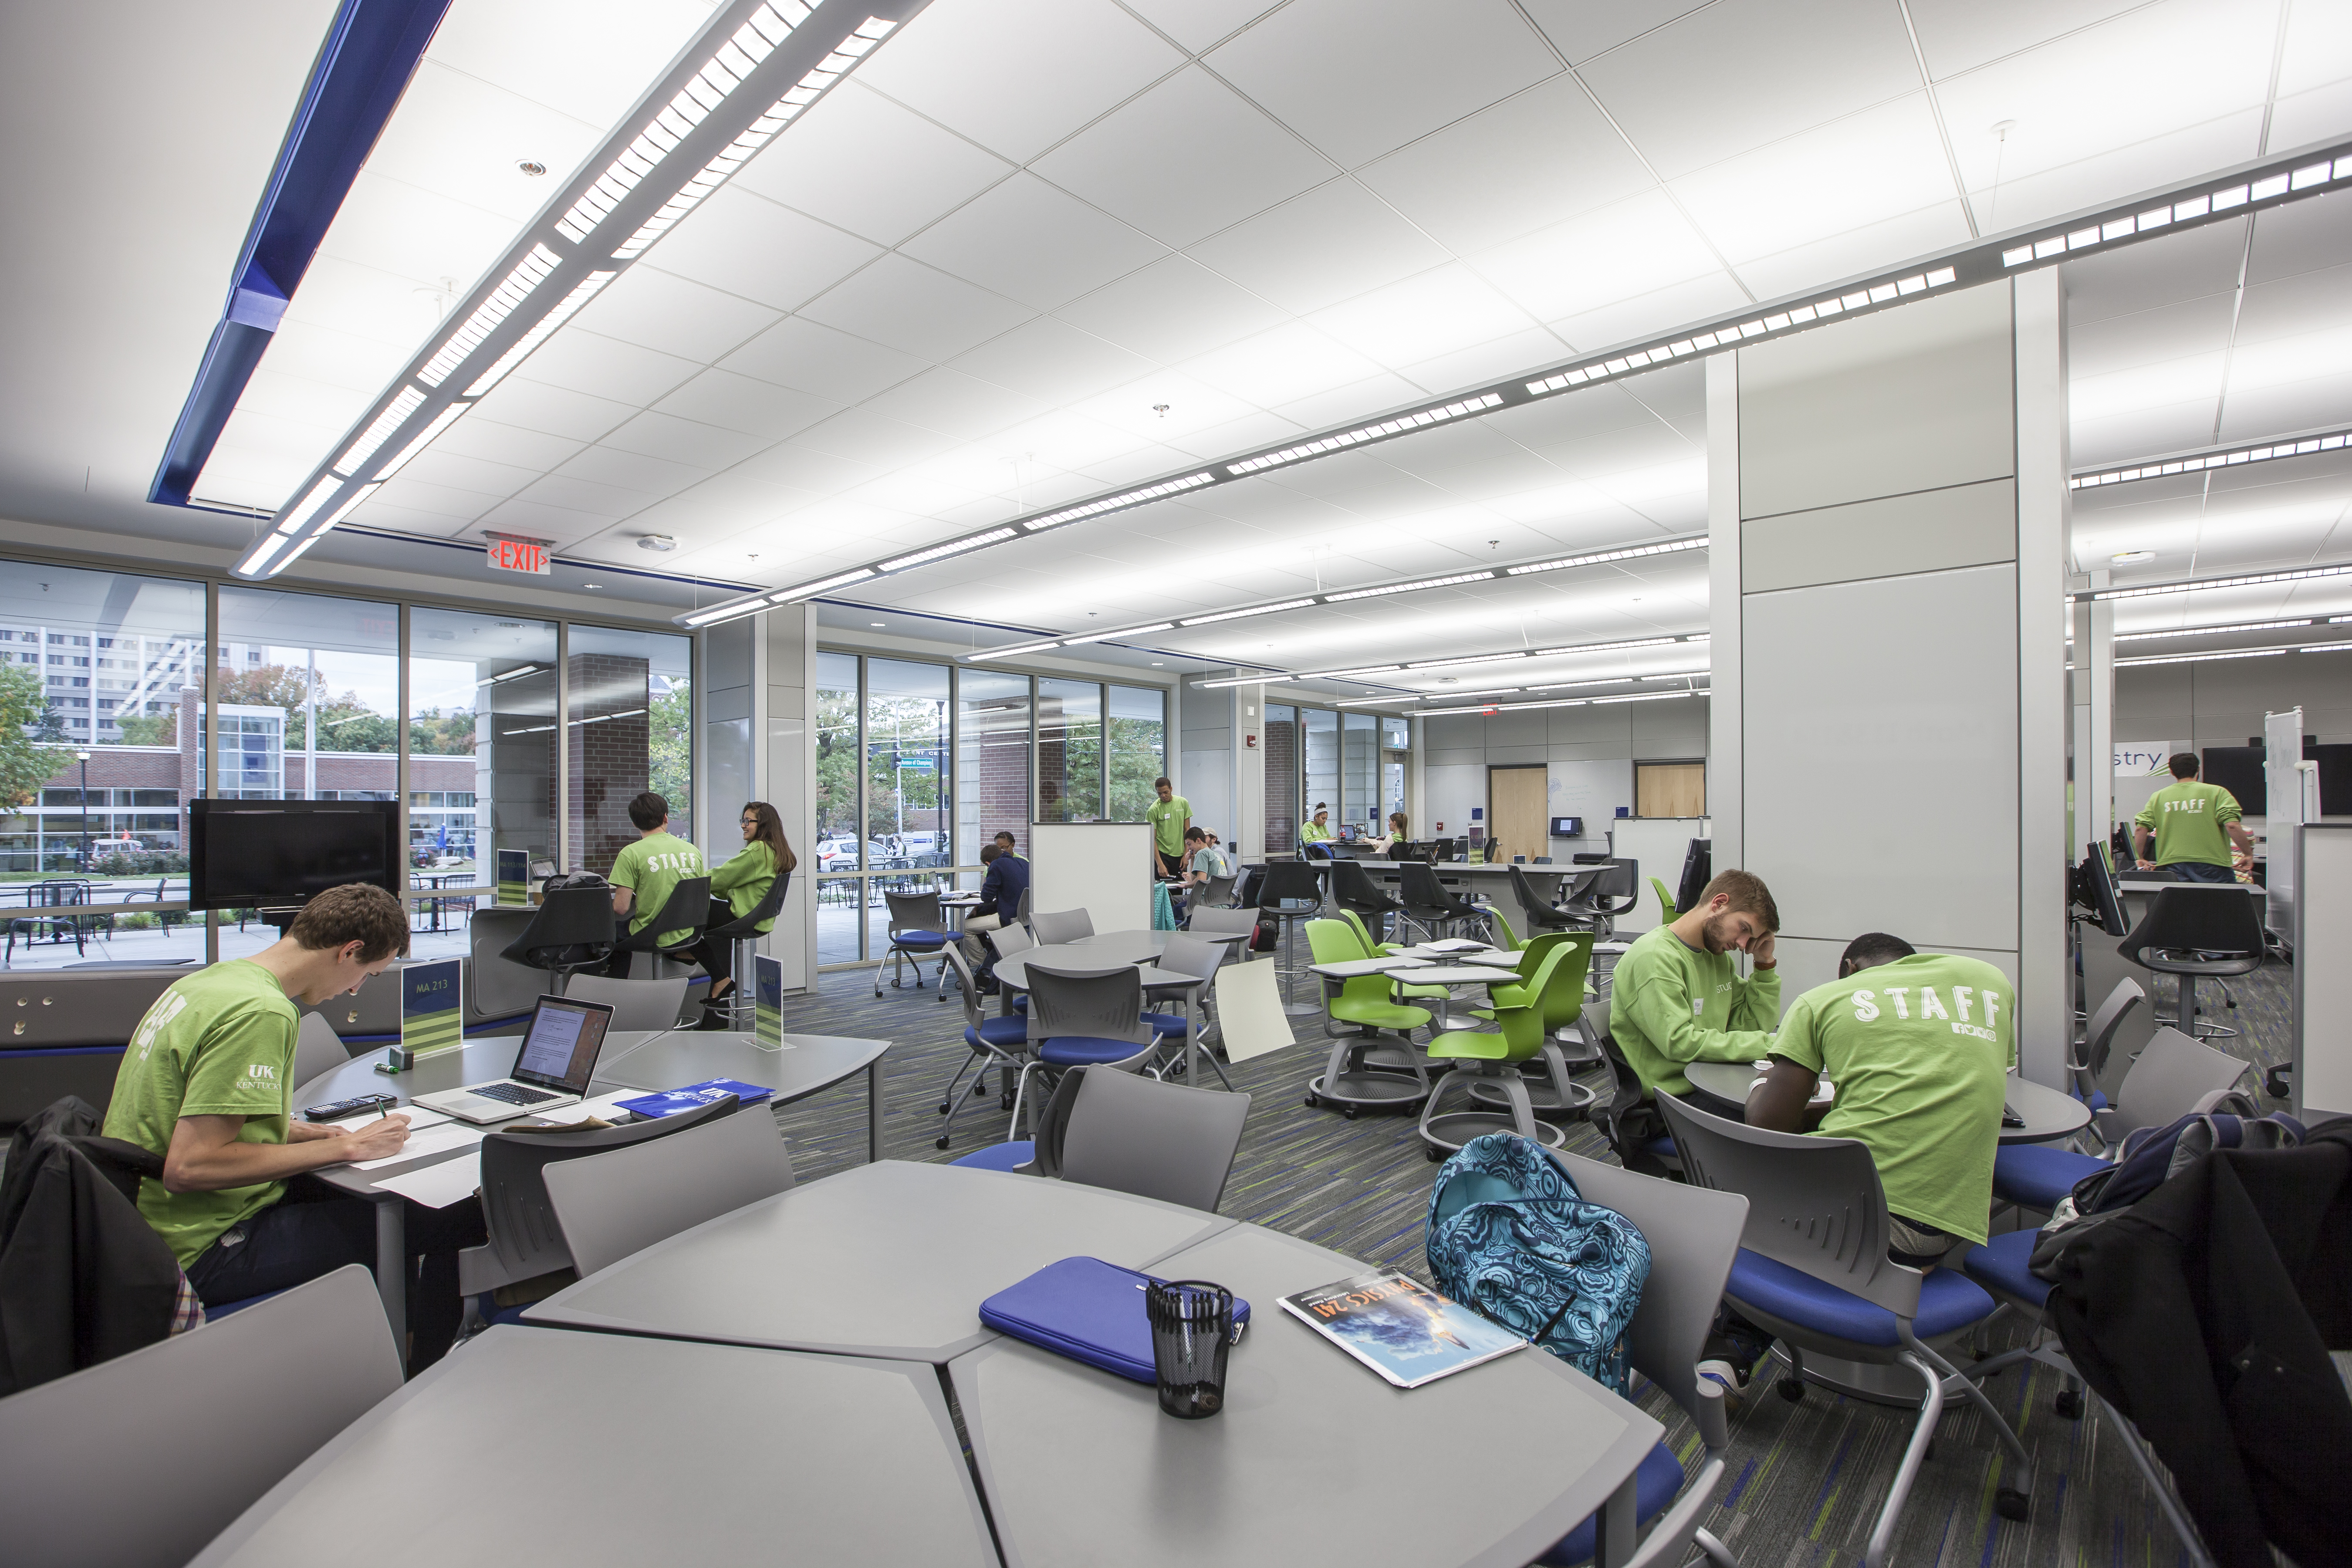 Highly customizable and electronically integrated with video monitors, the North Study is clad from floor to ceiling with high tech, modular DIRTT wall systems that makes every wall a writing surface.